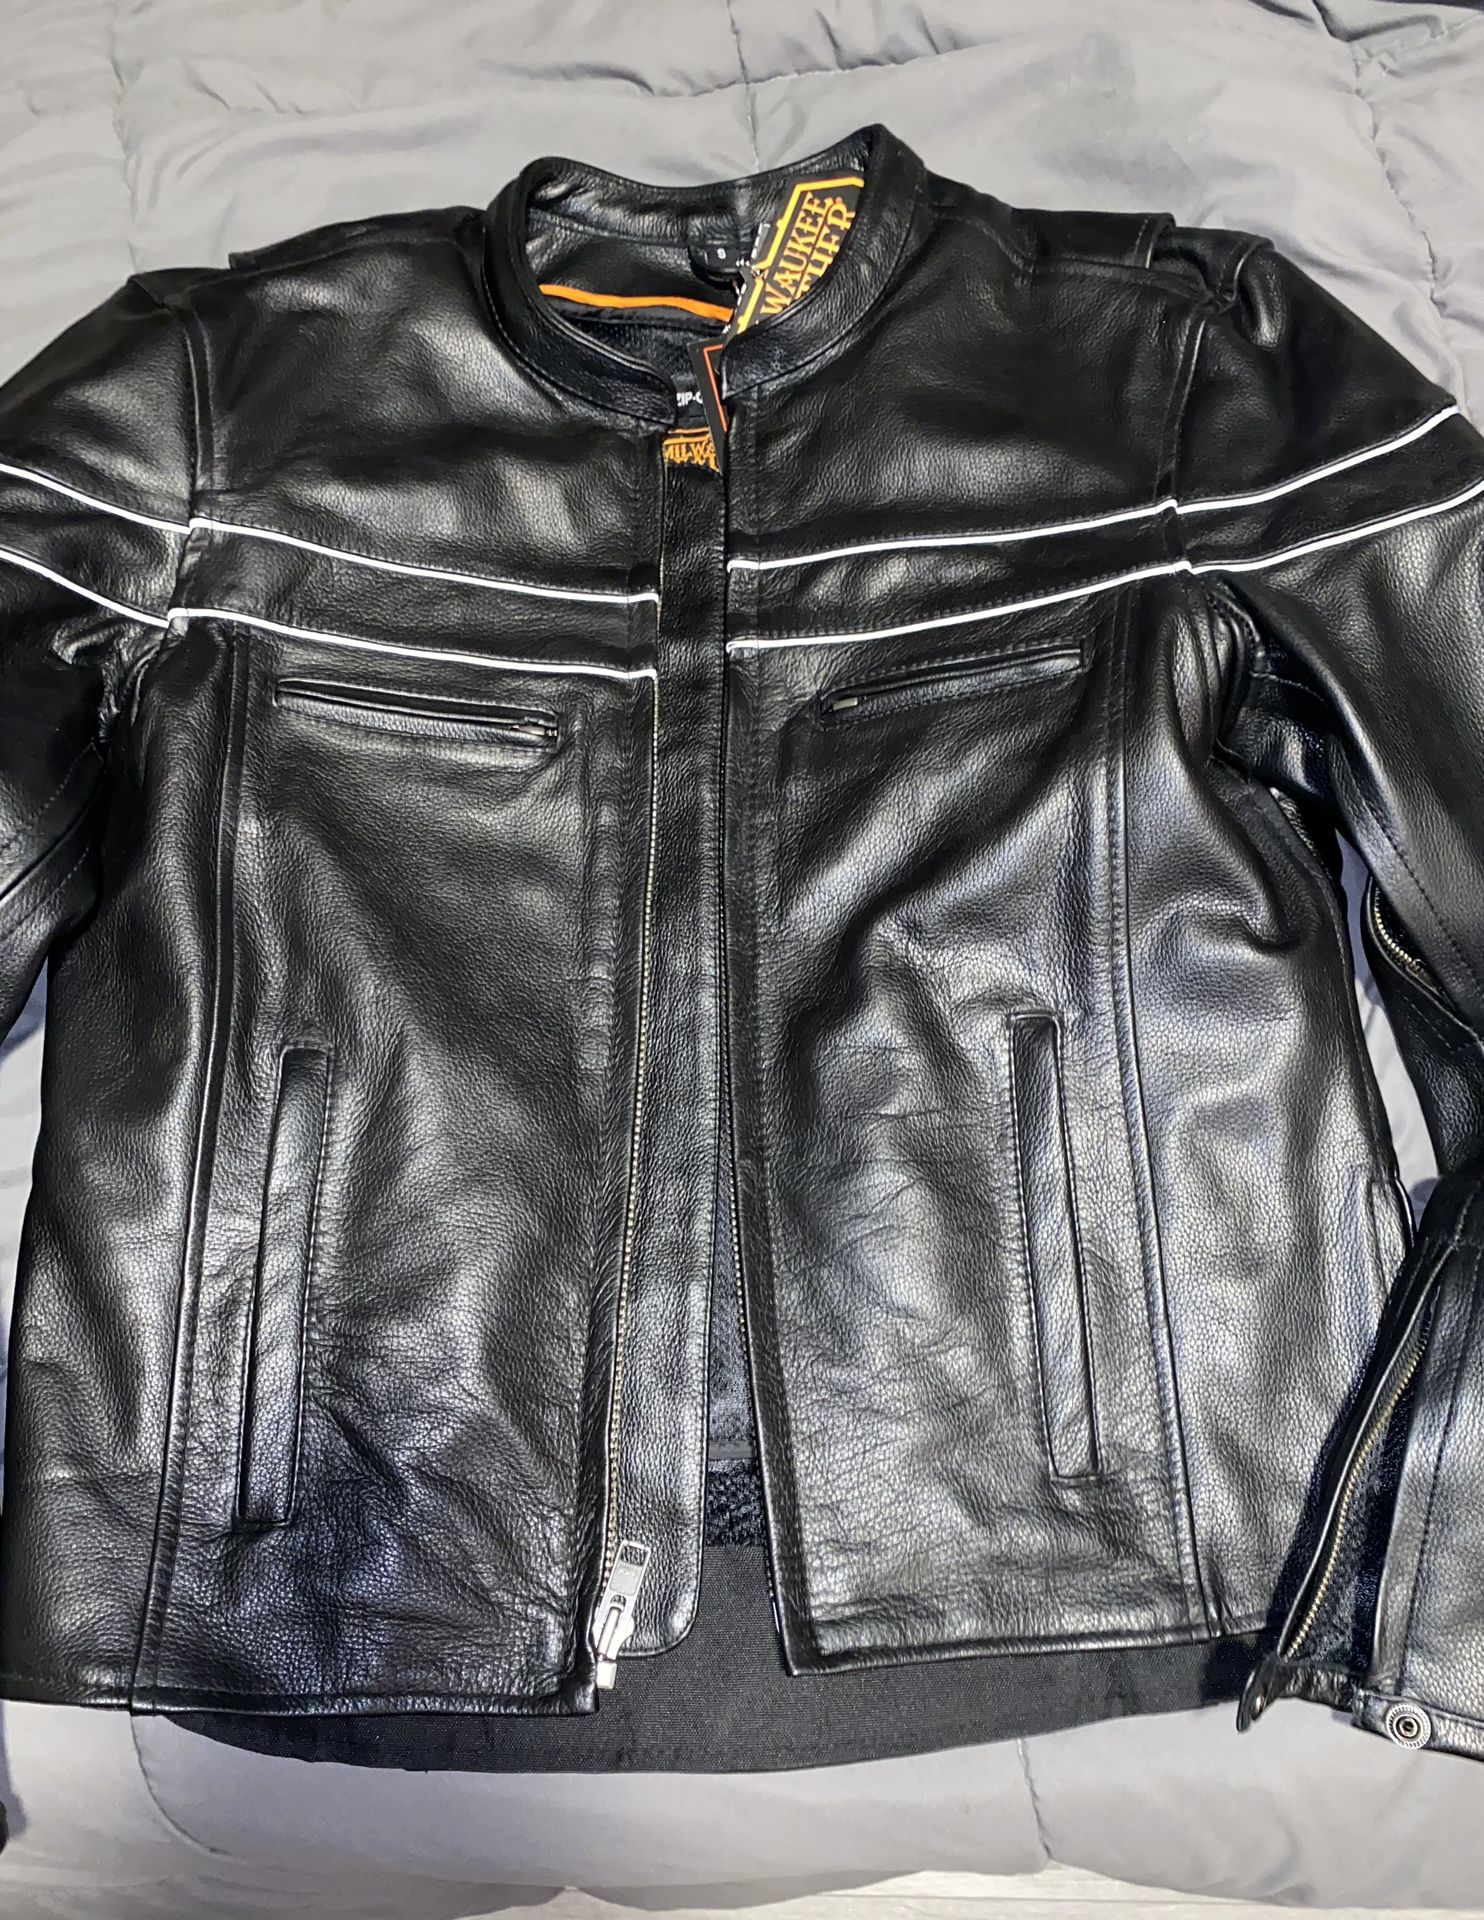 Motorcycle Jacket Cruiser Cafe Racer Milwaukee Leather Sporty Crossover New Men’s SMALL / MEDIUM